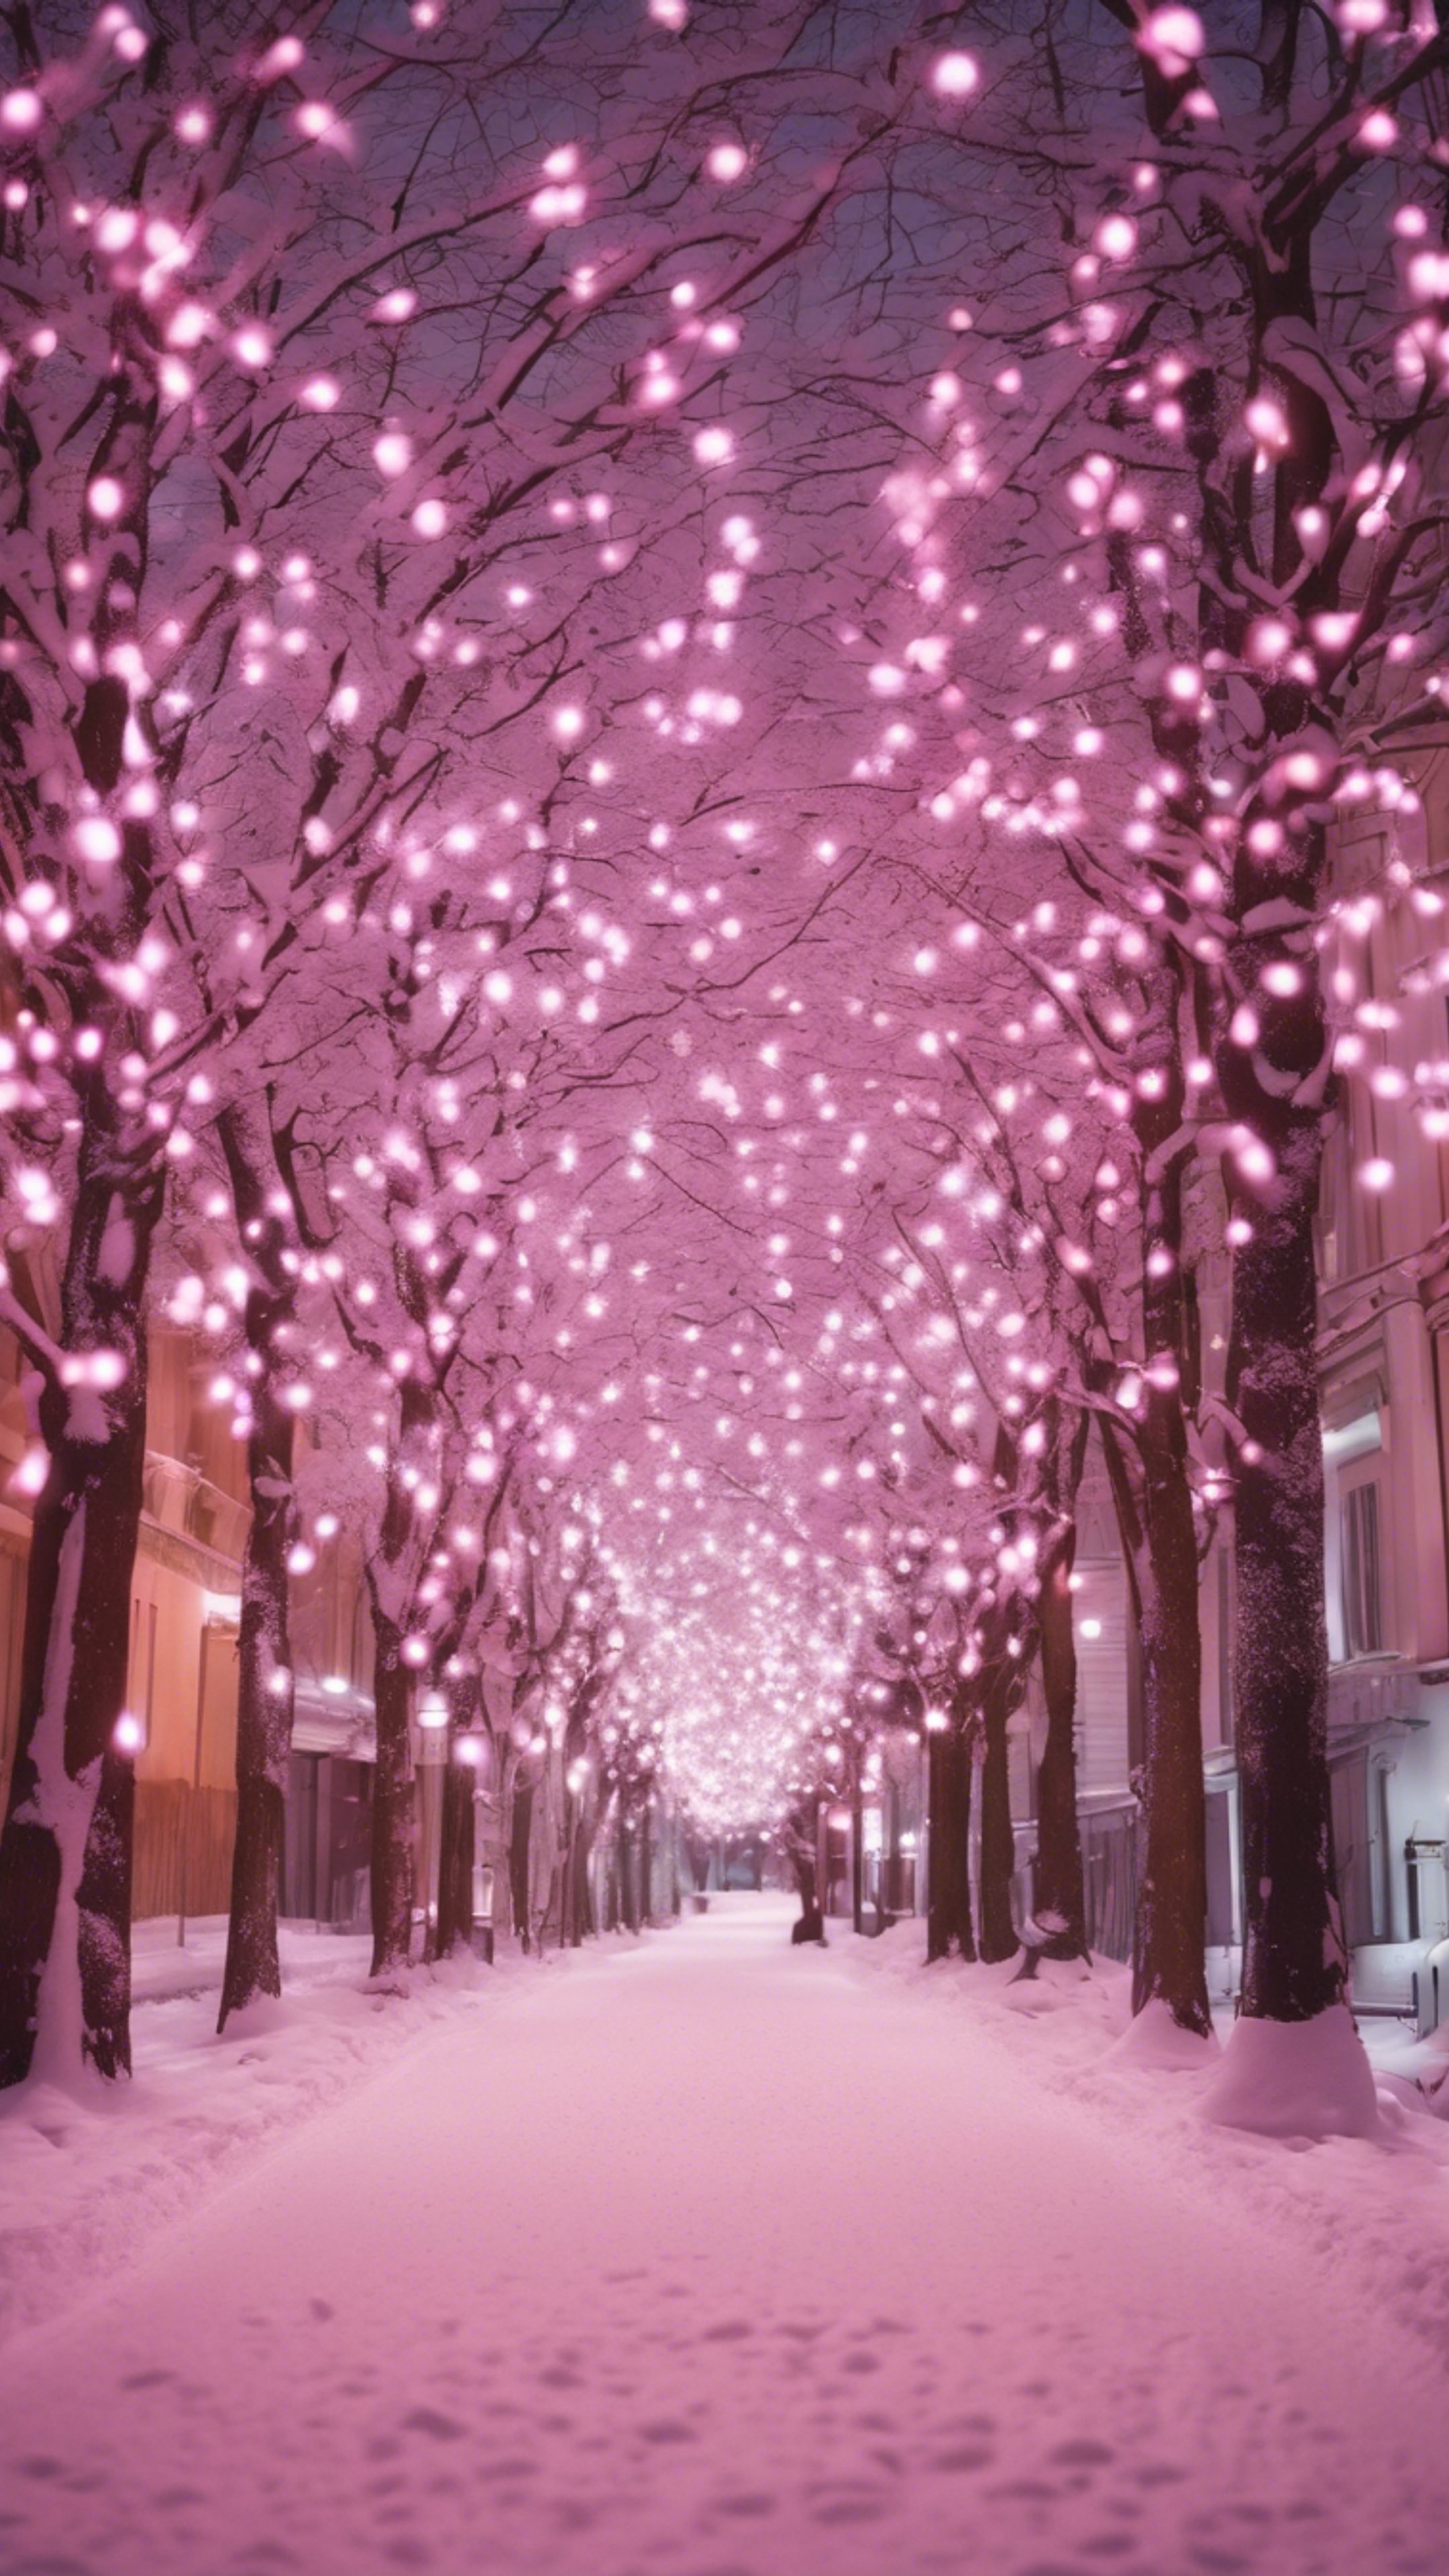 A snow-covered street illuminated by twinkling pink Christmas lights. Тапет[4ec6c372f2074900819e]